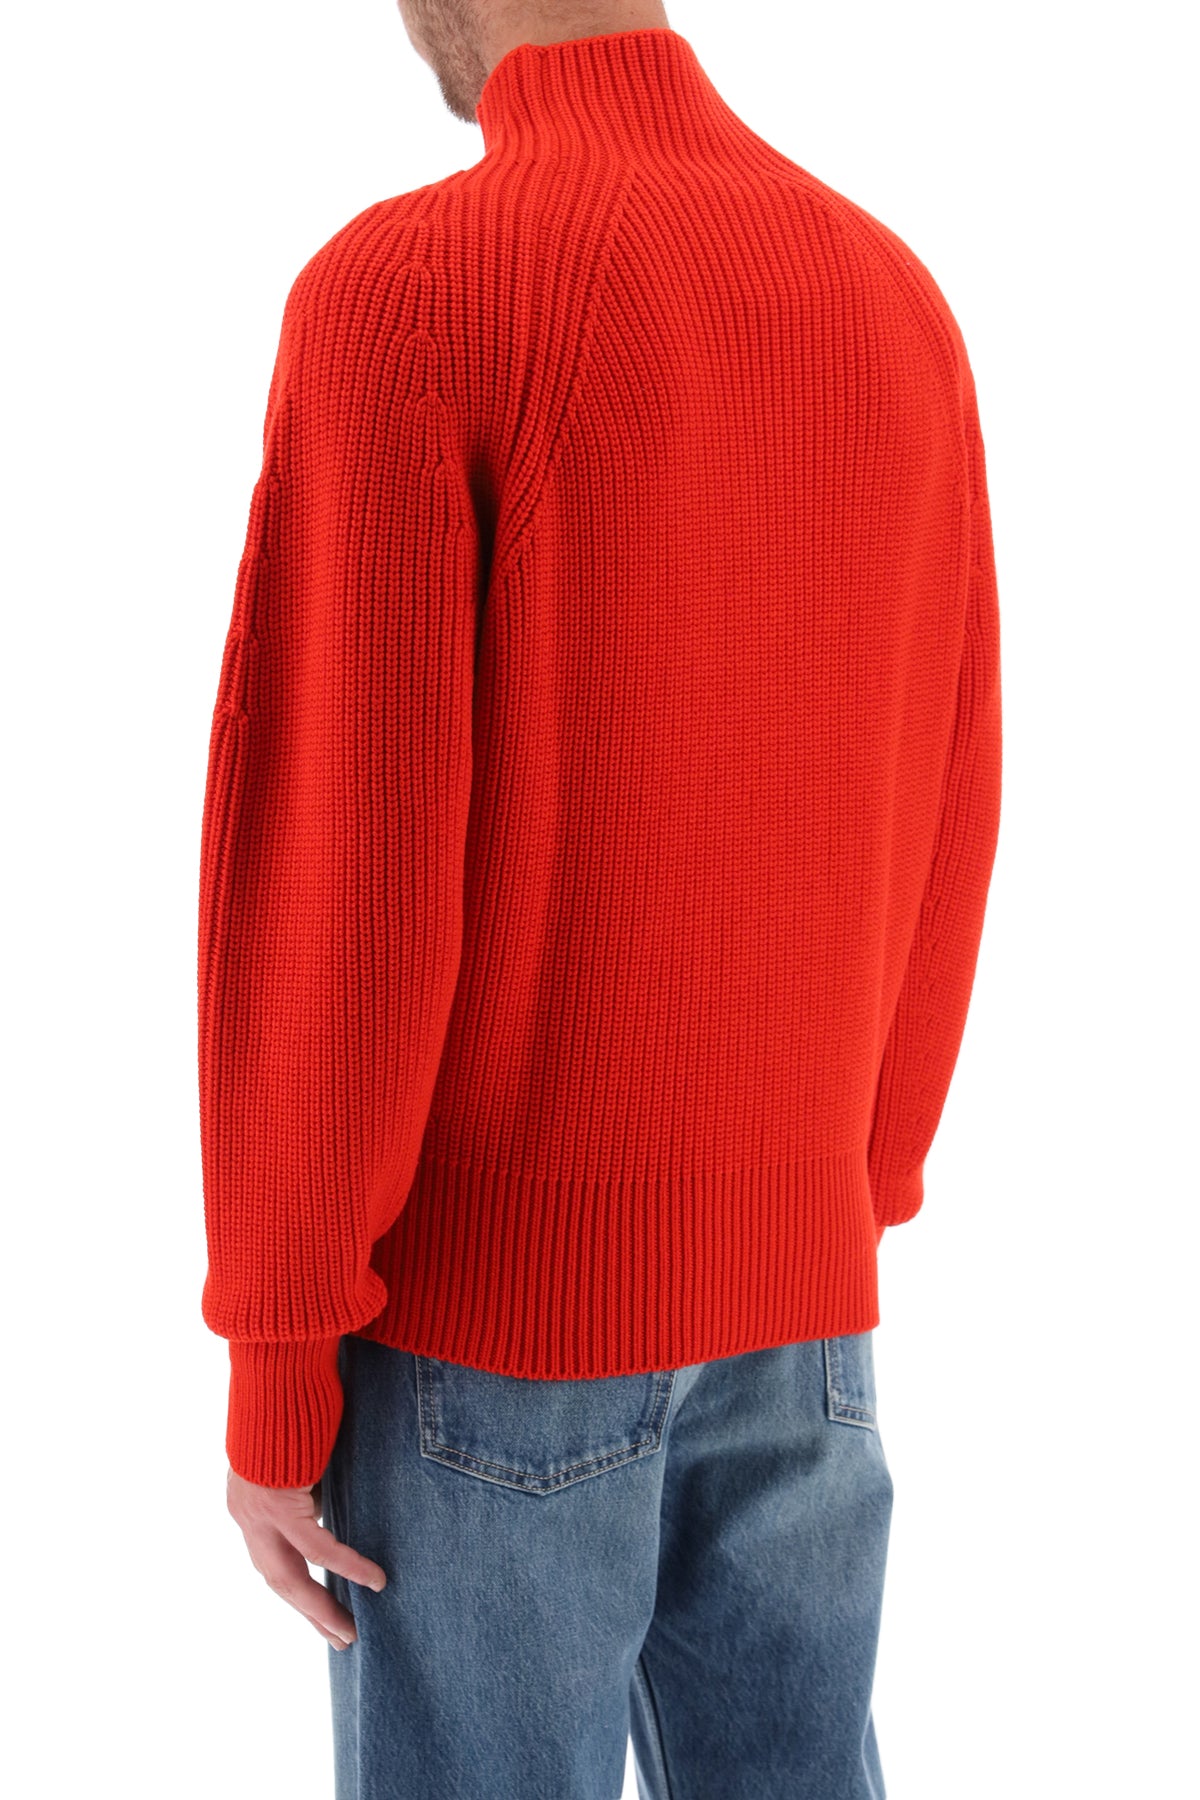 Shop Ferragamo Men's Funnel-neck Ribbed Wool Sweater In Red For Fw23 Collection